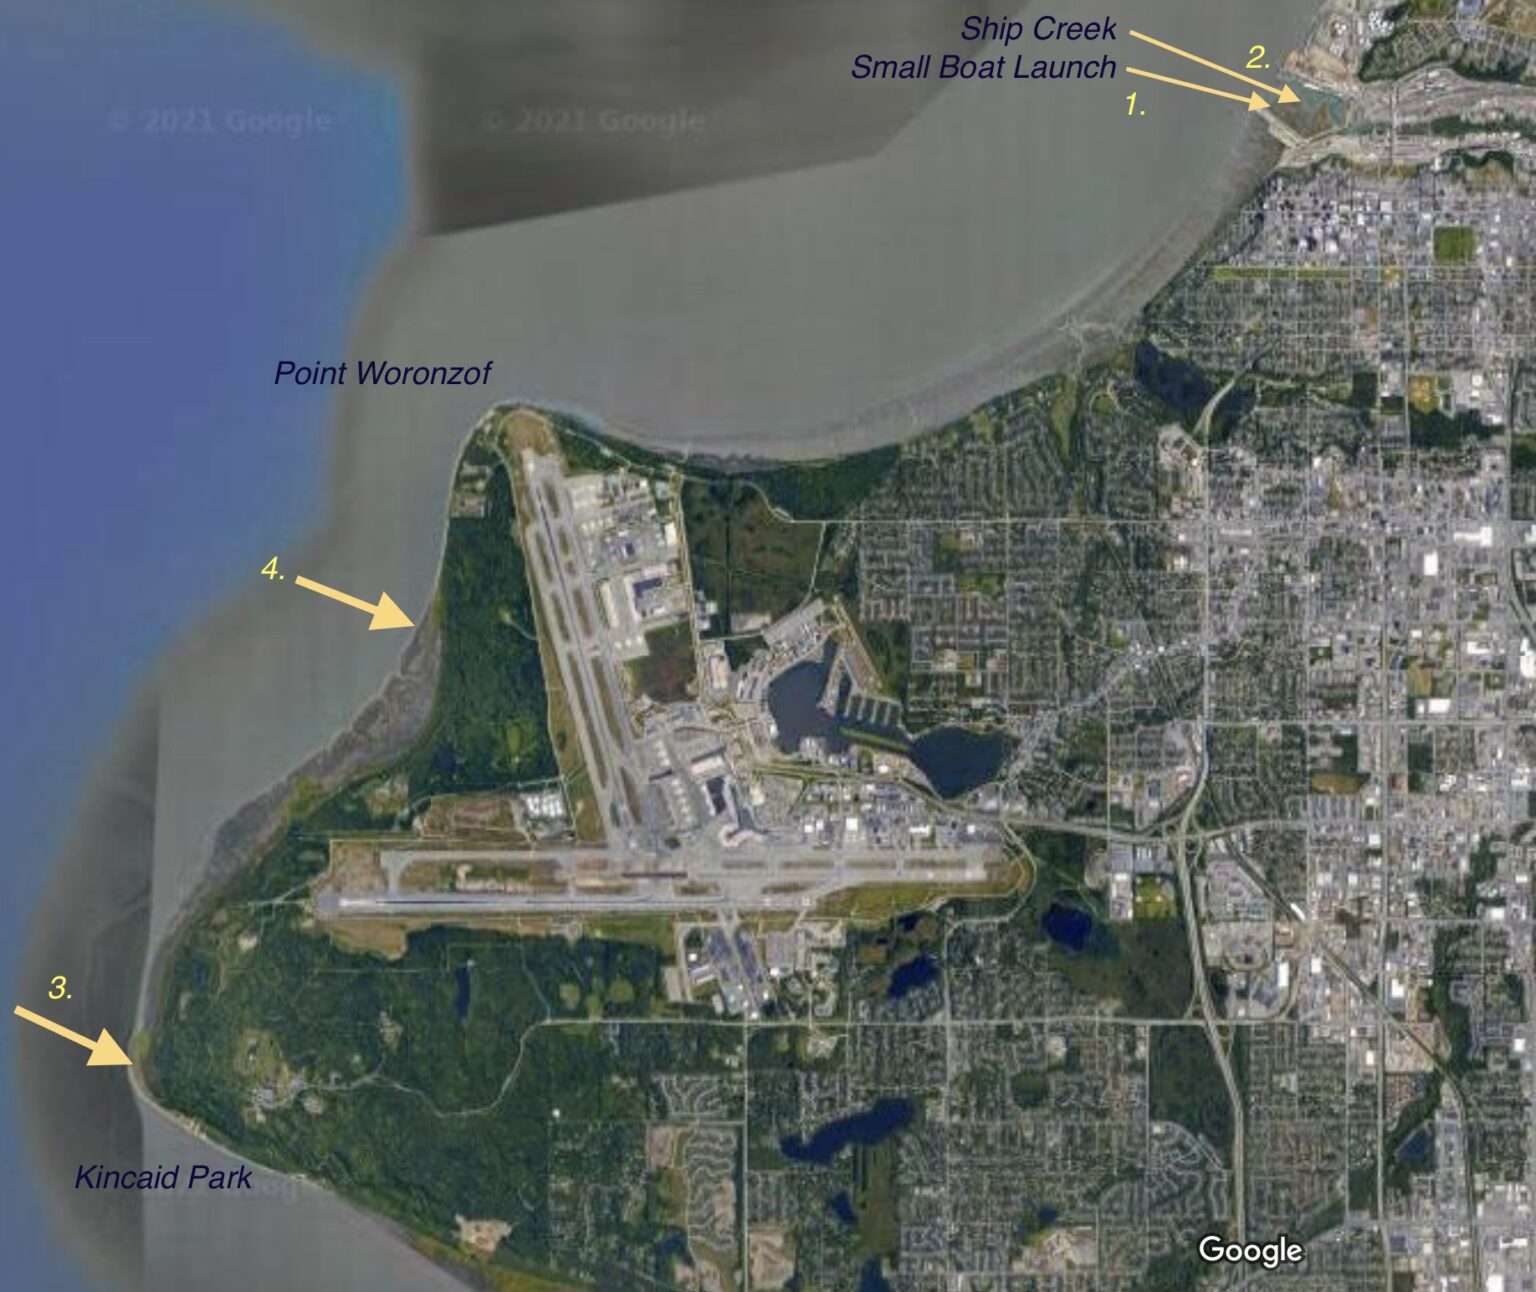 Satelite image of downtown Anchorage including the author's harvesting locations